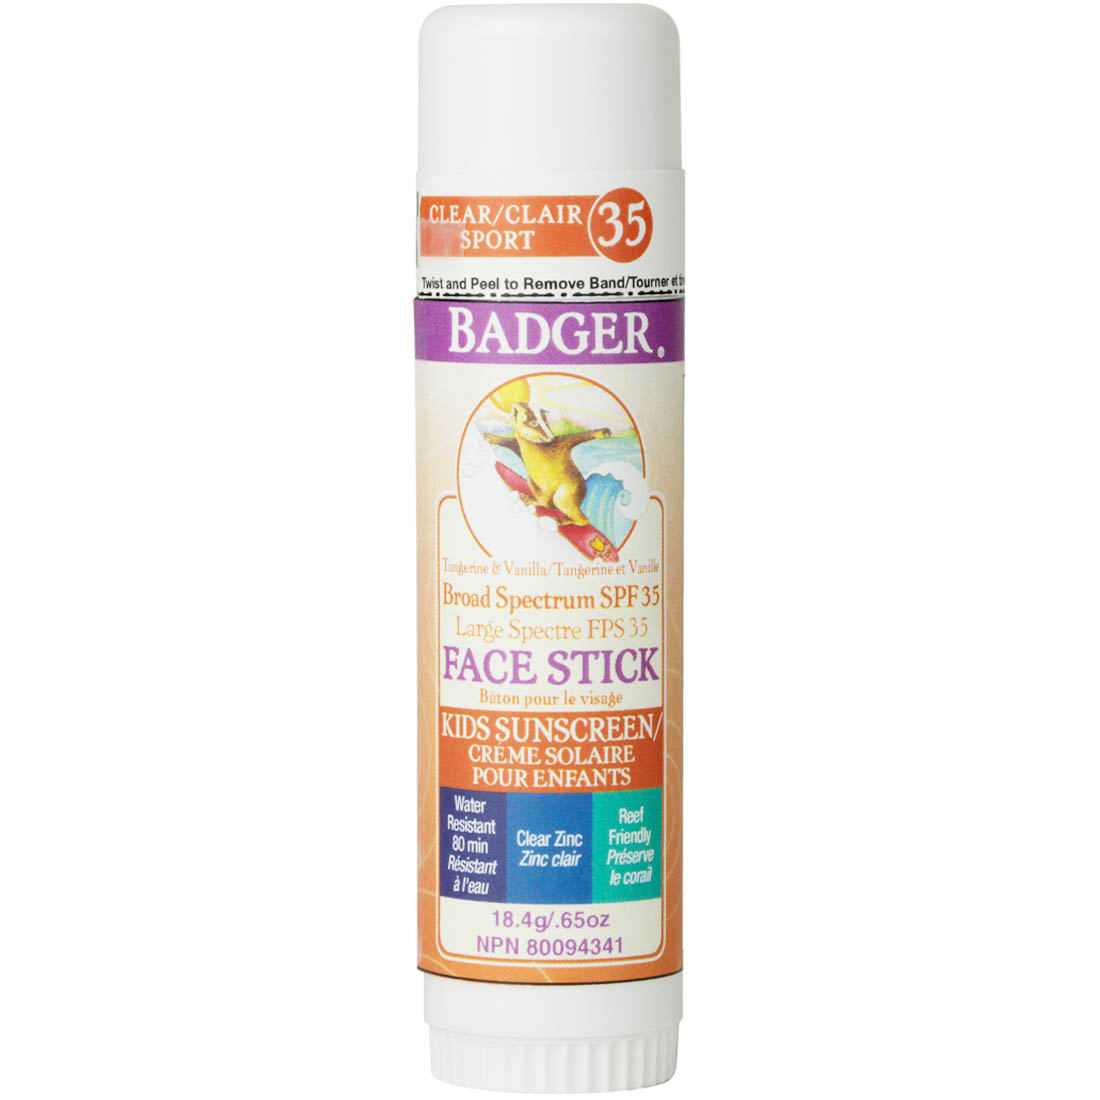 Badger Clear Zinc Sunscreen Face Stick SPF 35, Broad Spectrum, Kids and Adults, Water Resistant, 18.4g